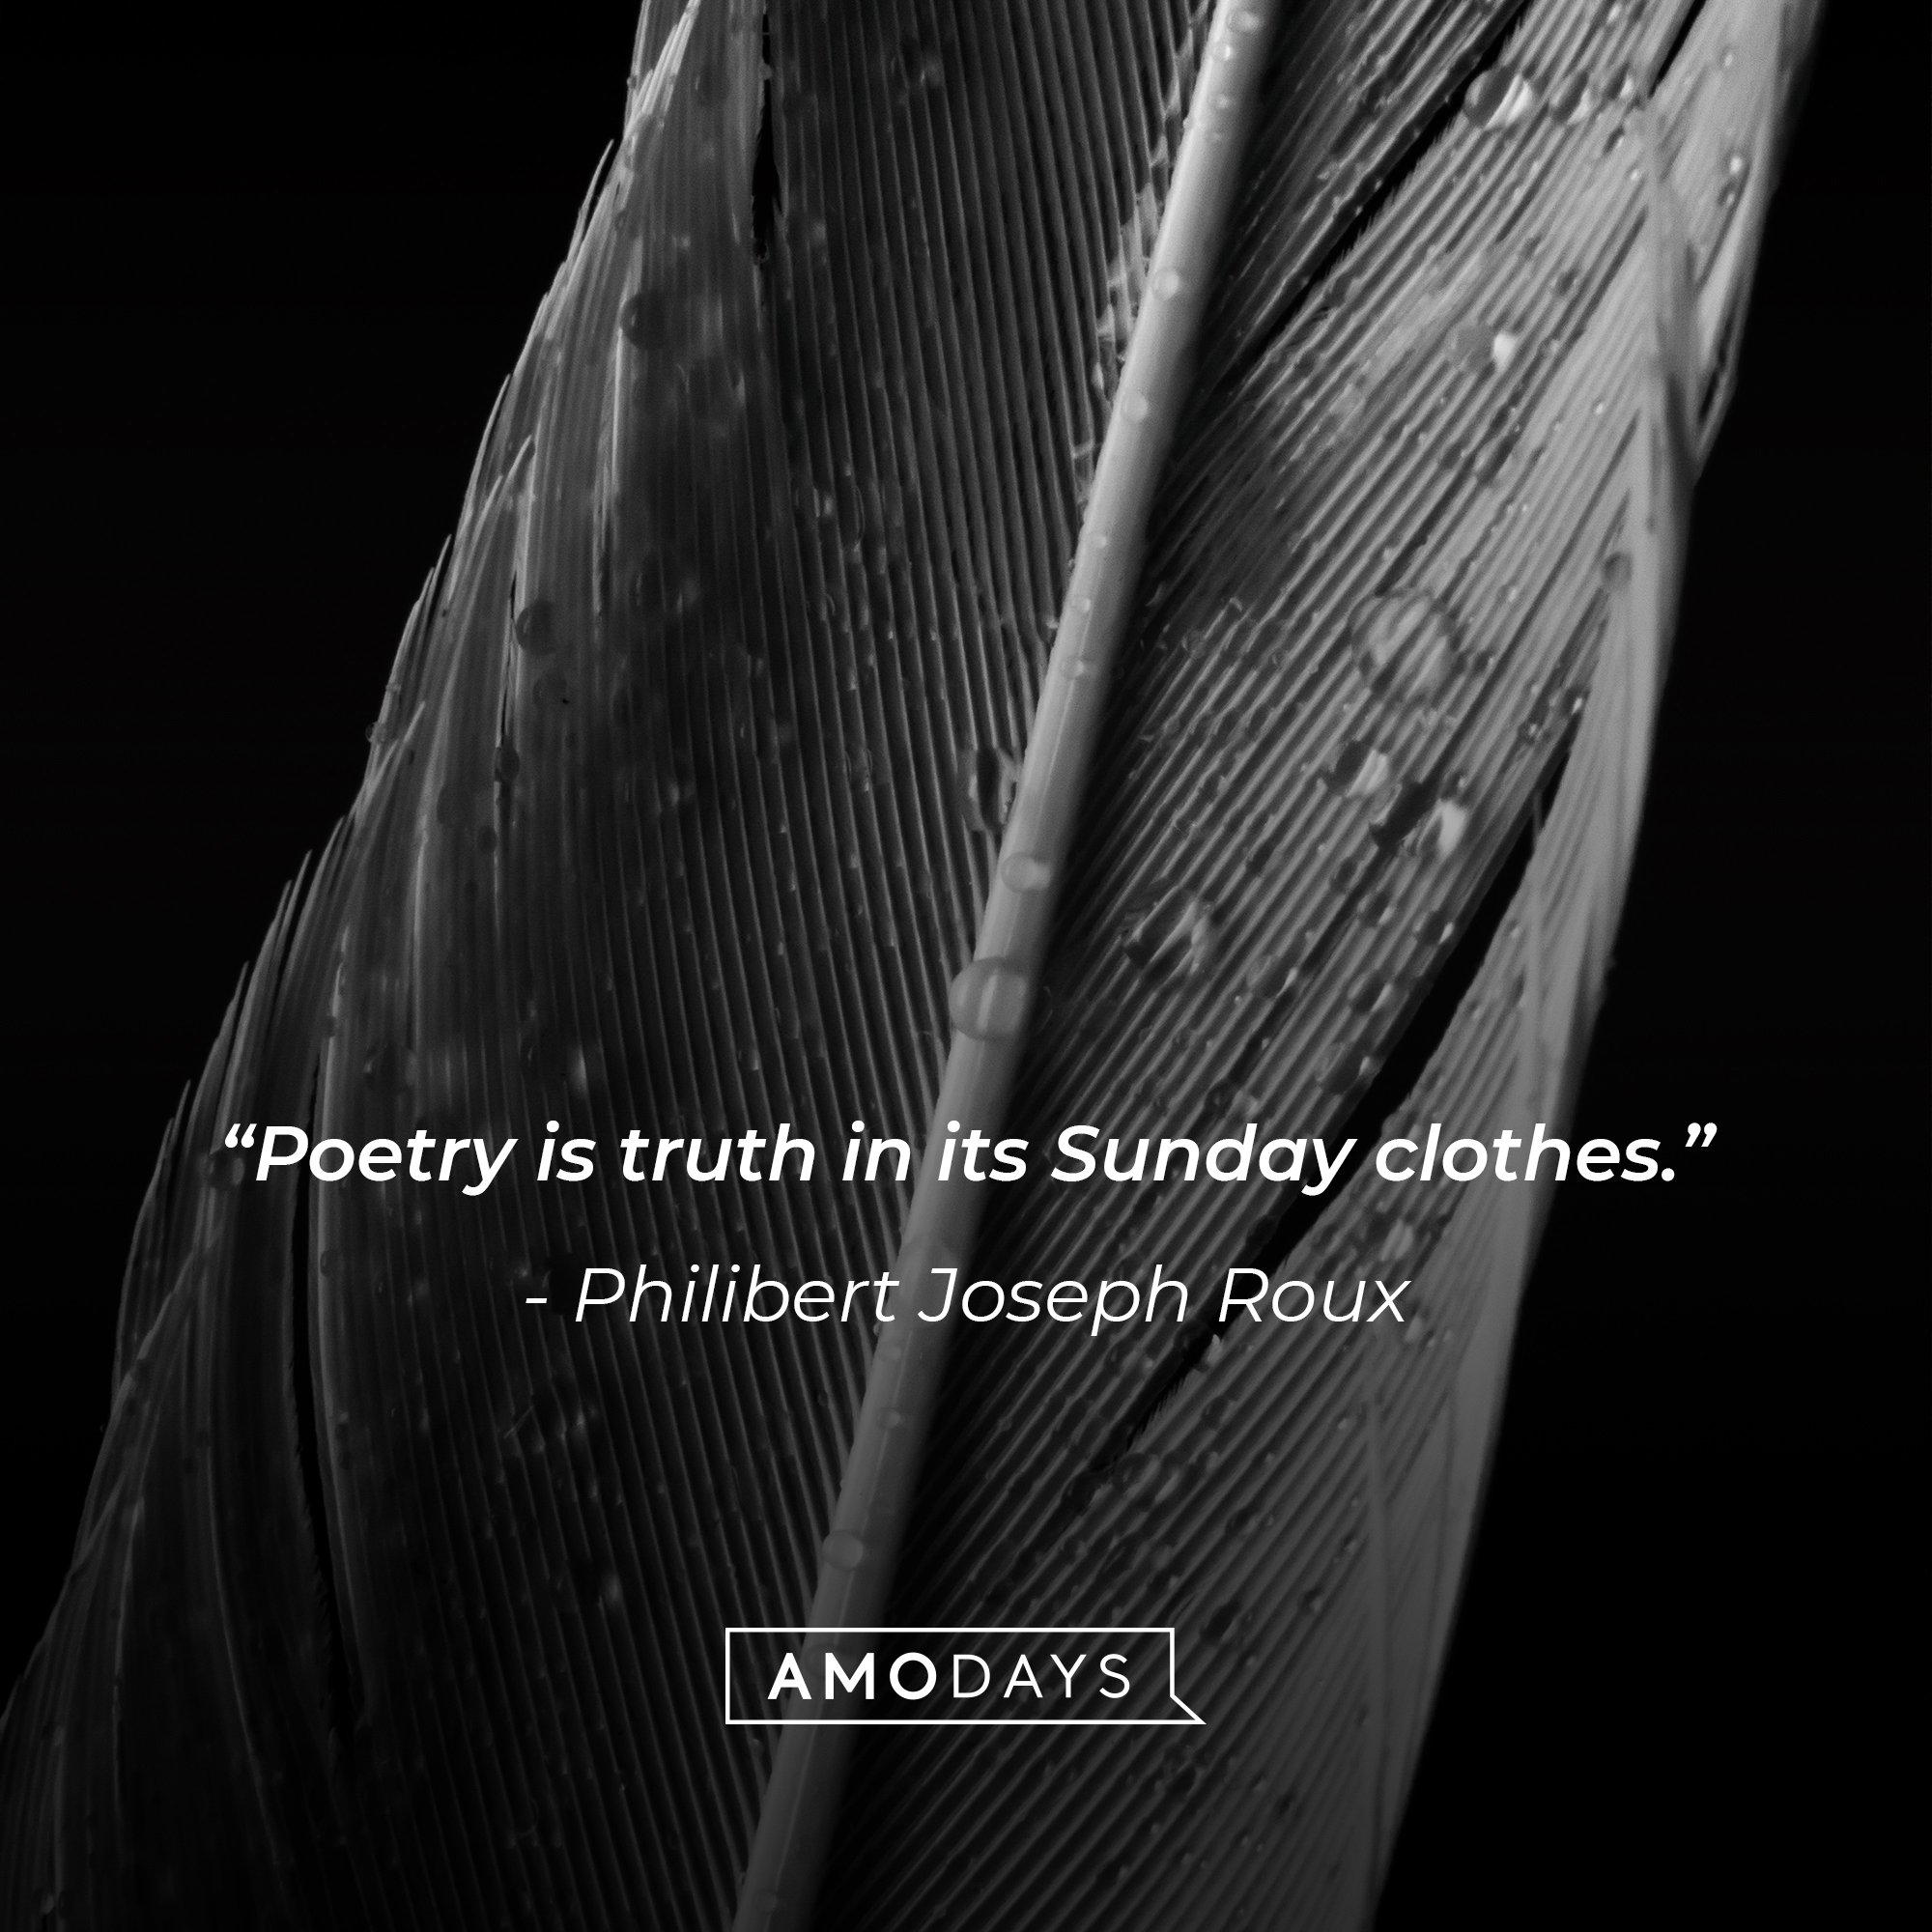 Philibert Joseph Roux's quote: “Poetry is truth in its Sunday clothes.” | Image: AmoDays